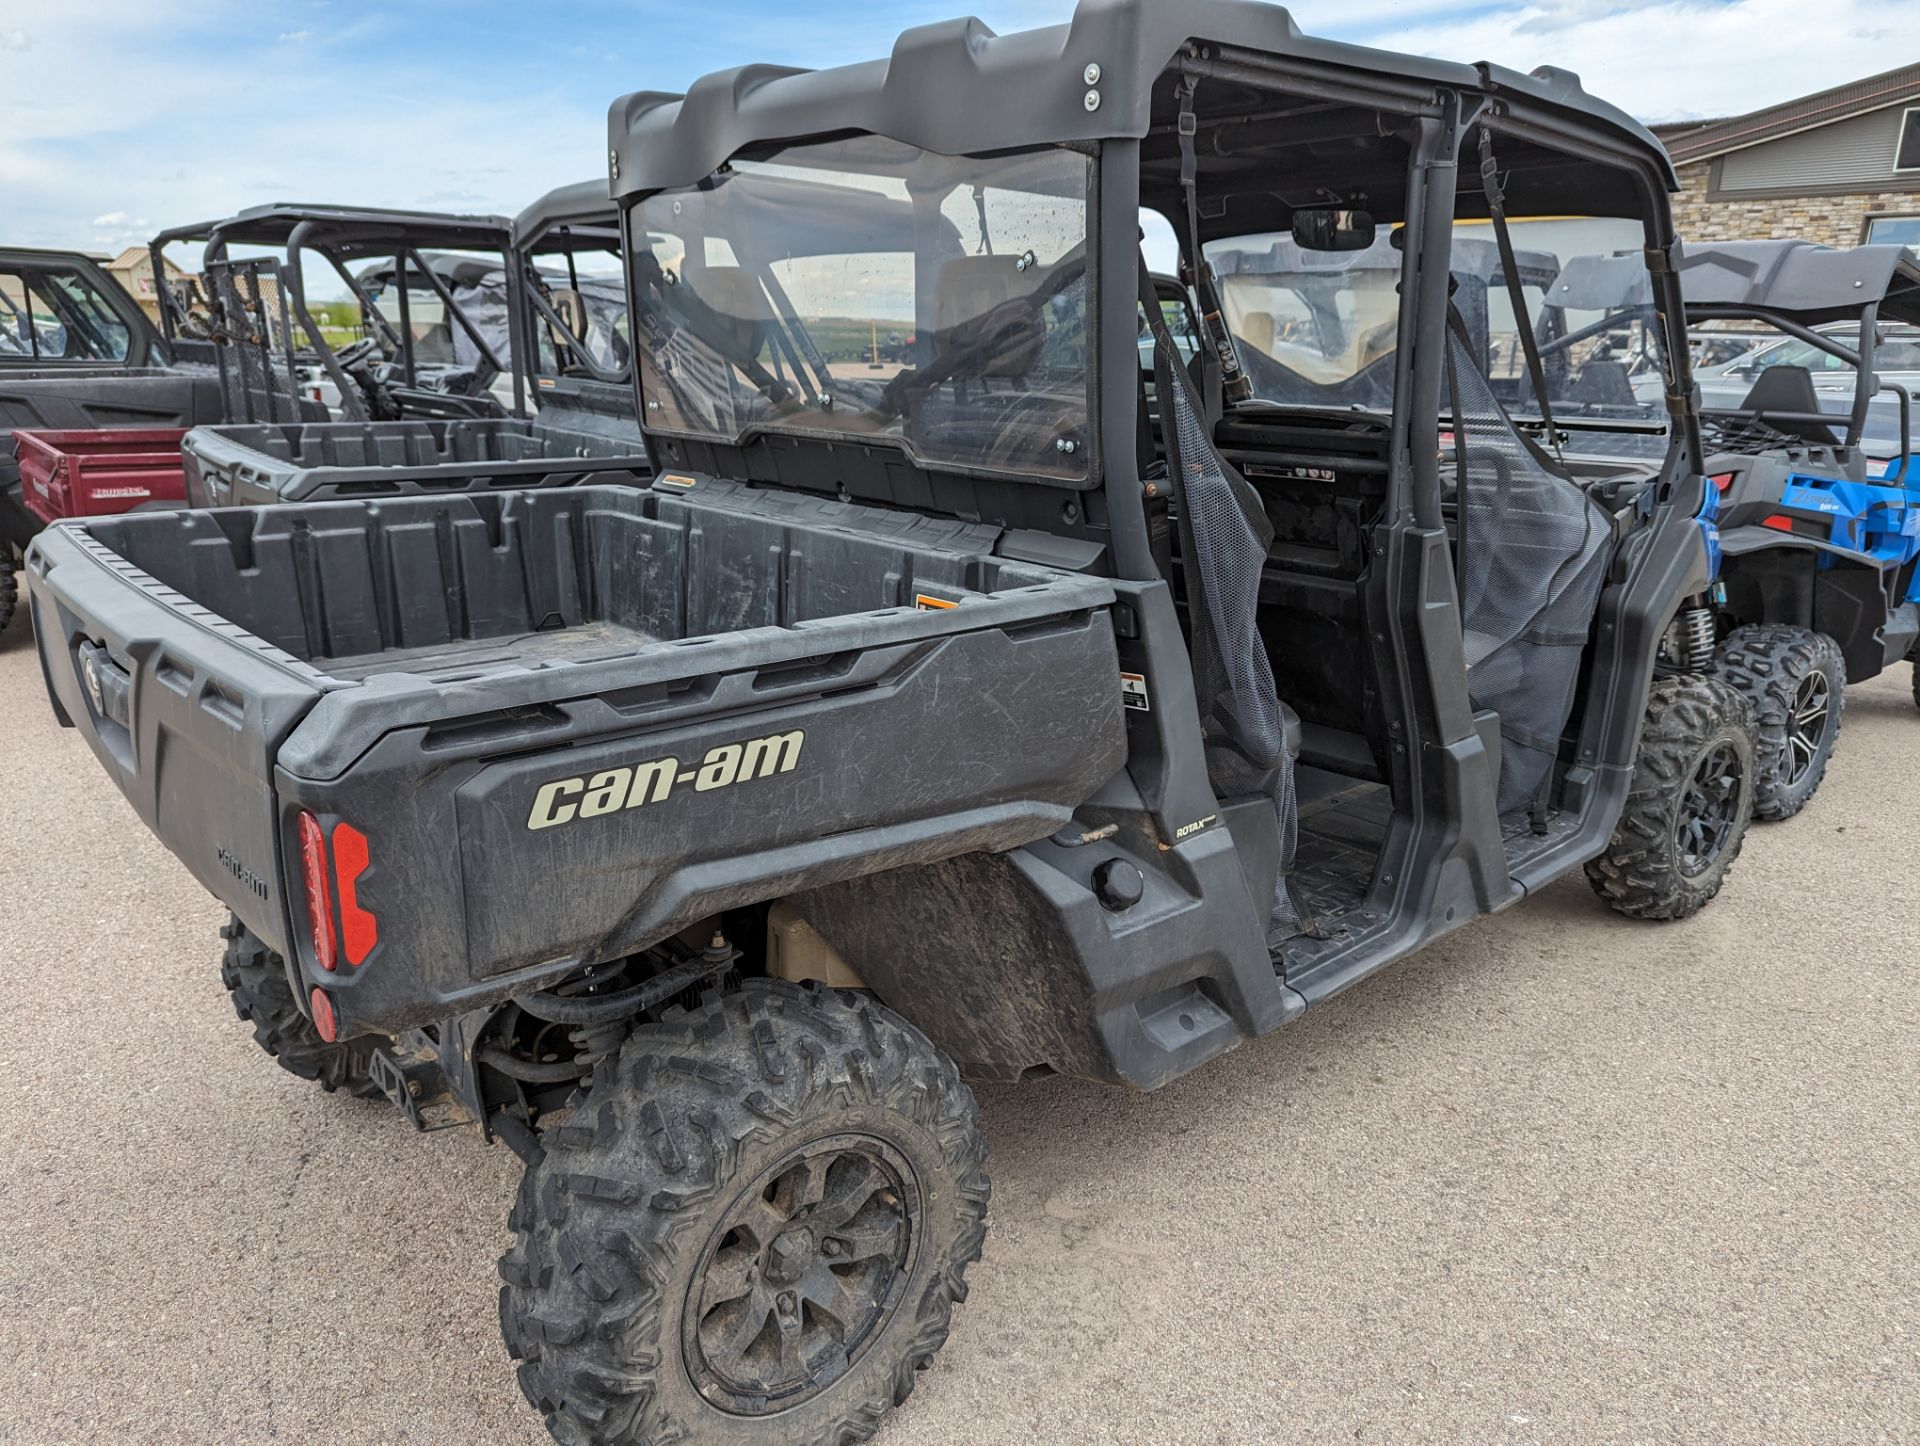 2021 Can-Am Defender MAX DPS HD10 in Rapid City, South Dakota - Photo 7